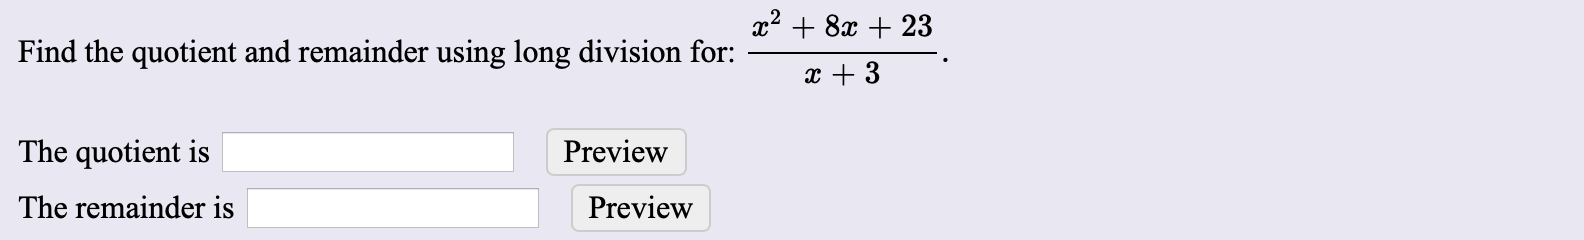 x28x23
Find the quotient and remainder using long division for:
The quotient is
Preview
The remainder is
Preview
